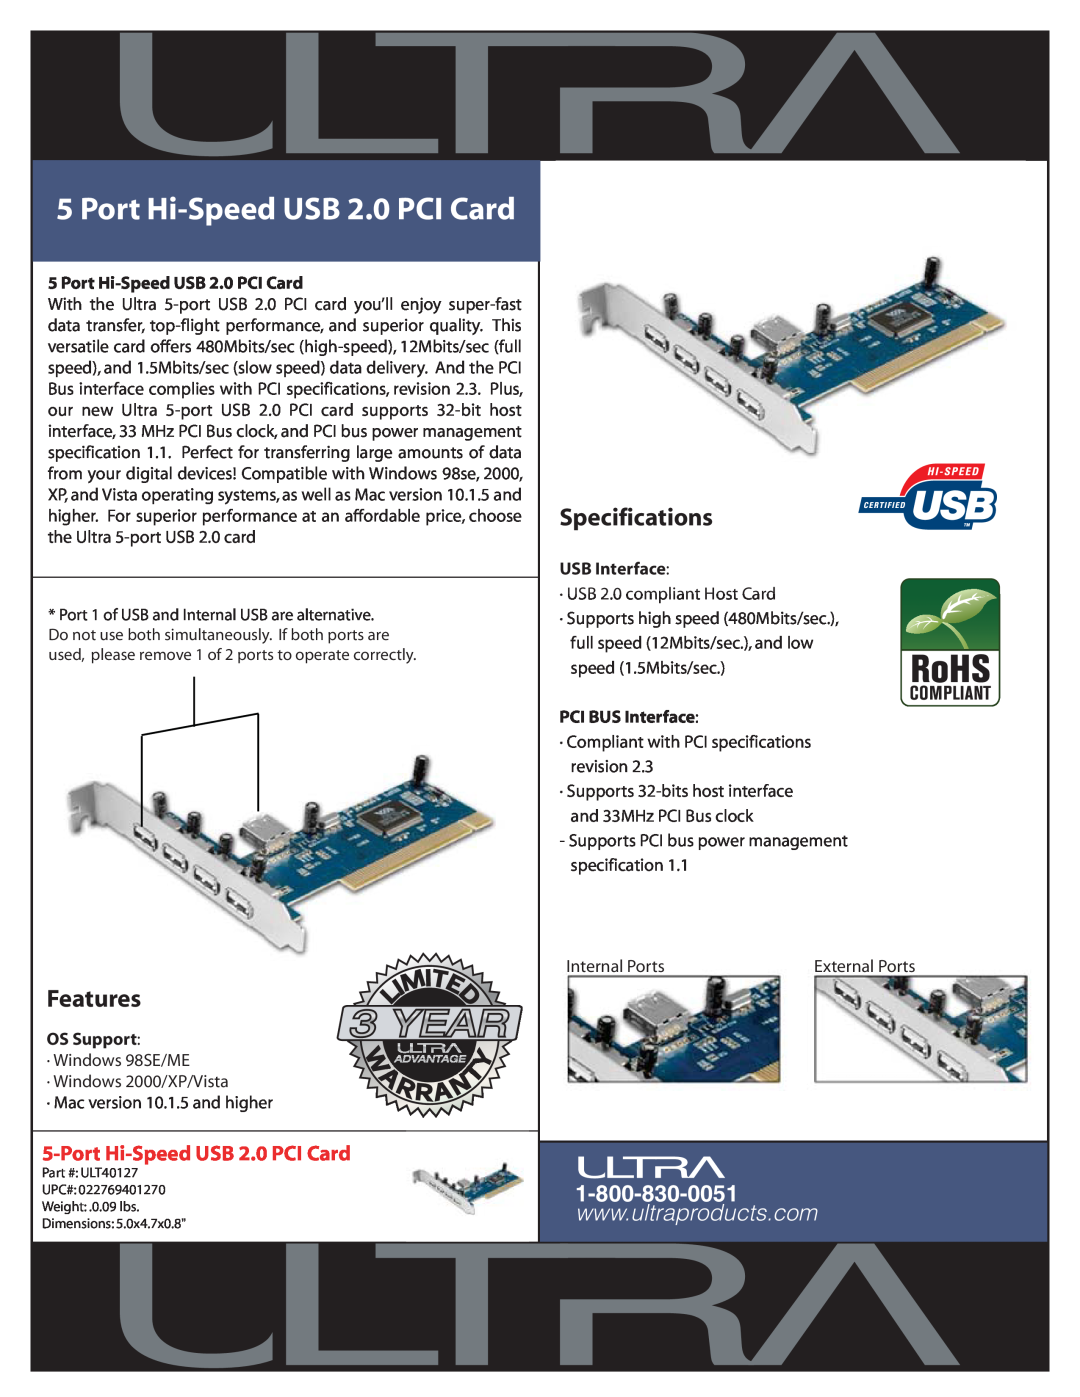 Ultra Products ULT40127 specifications Port Hi-Speed USB 2.0 PCI Card, Features, Specifications, OS Support, USB Interface 